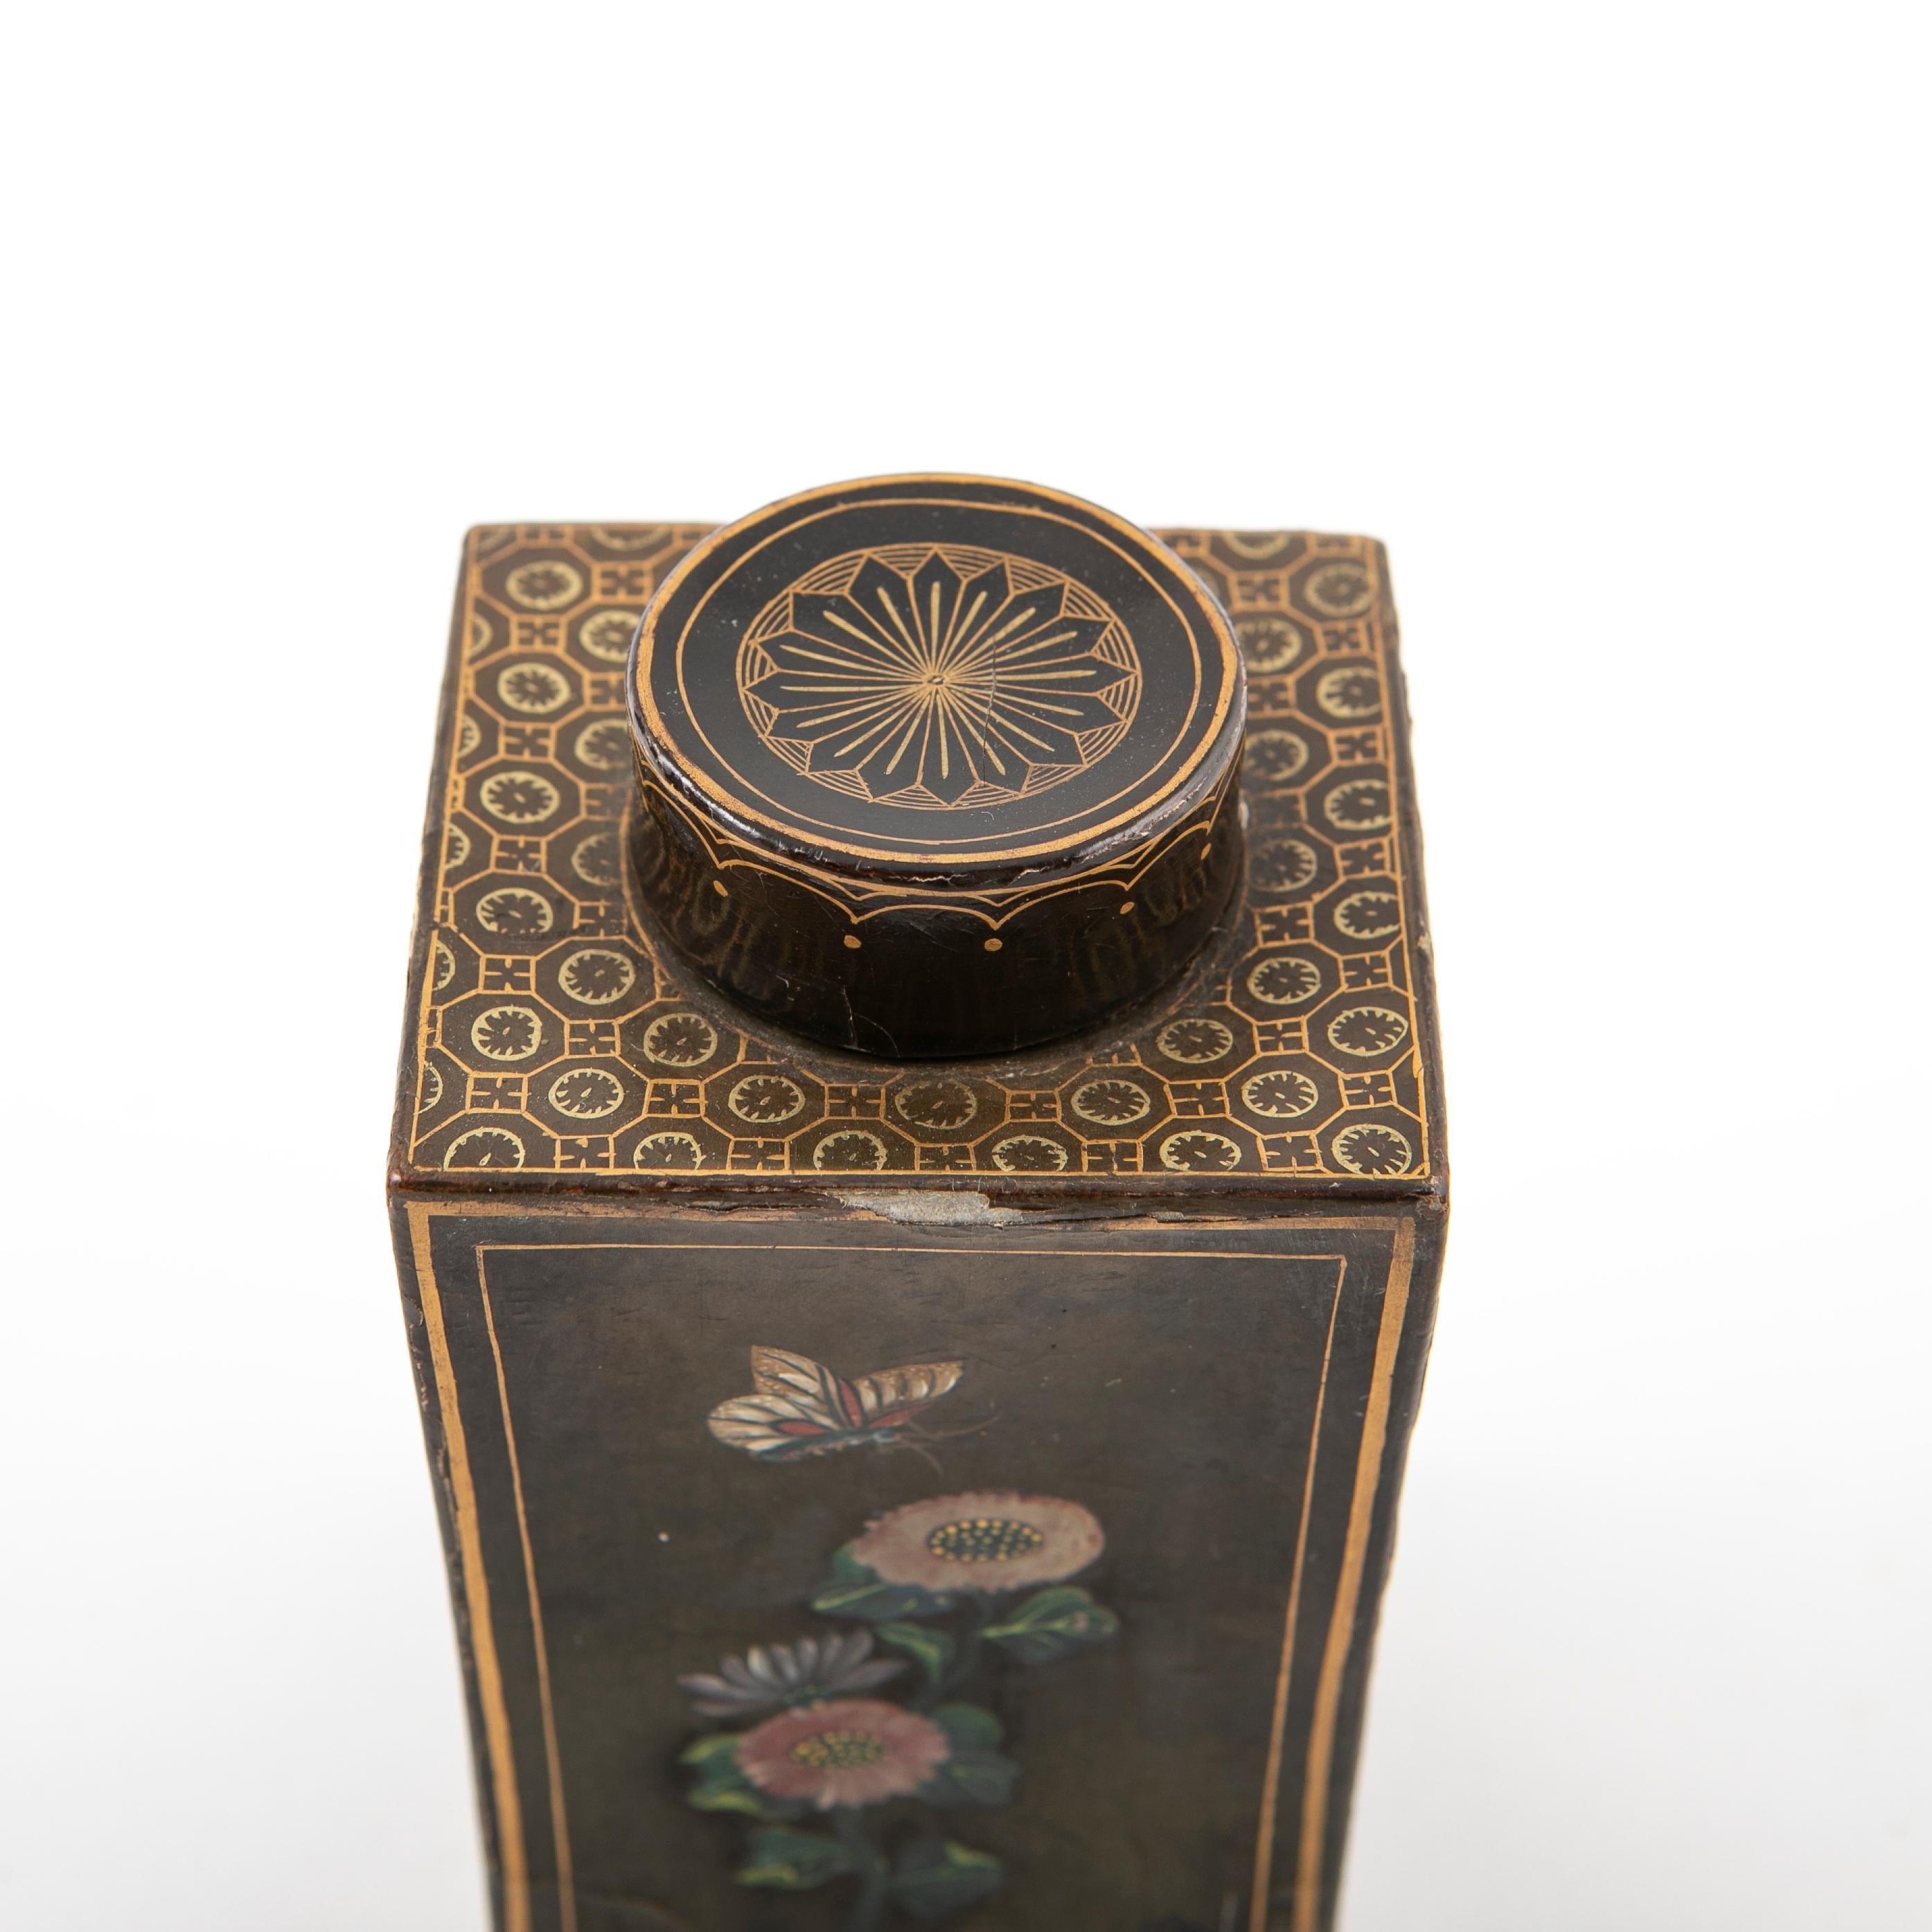 19th Century Tea Caddy in Black Lacquer with Floral Decorations